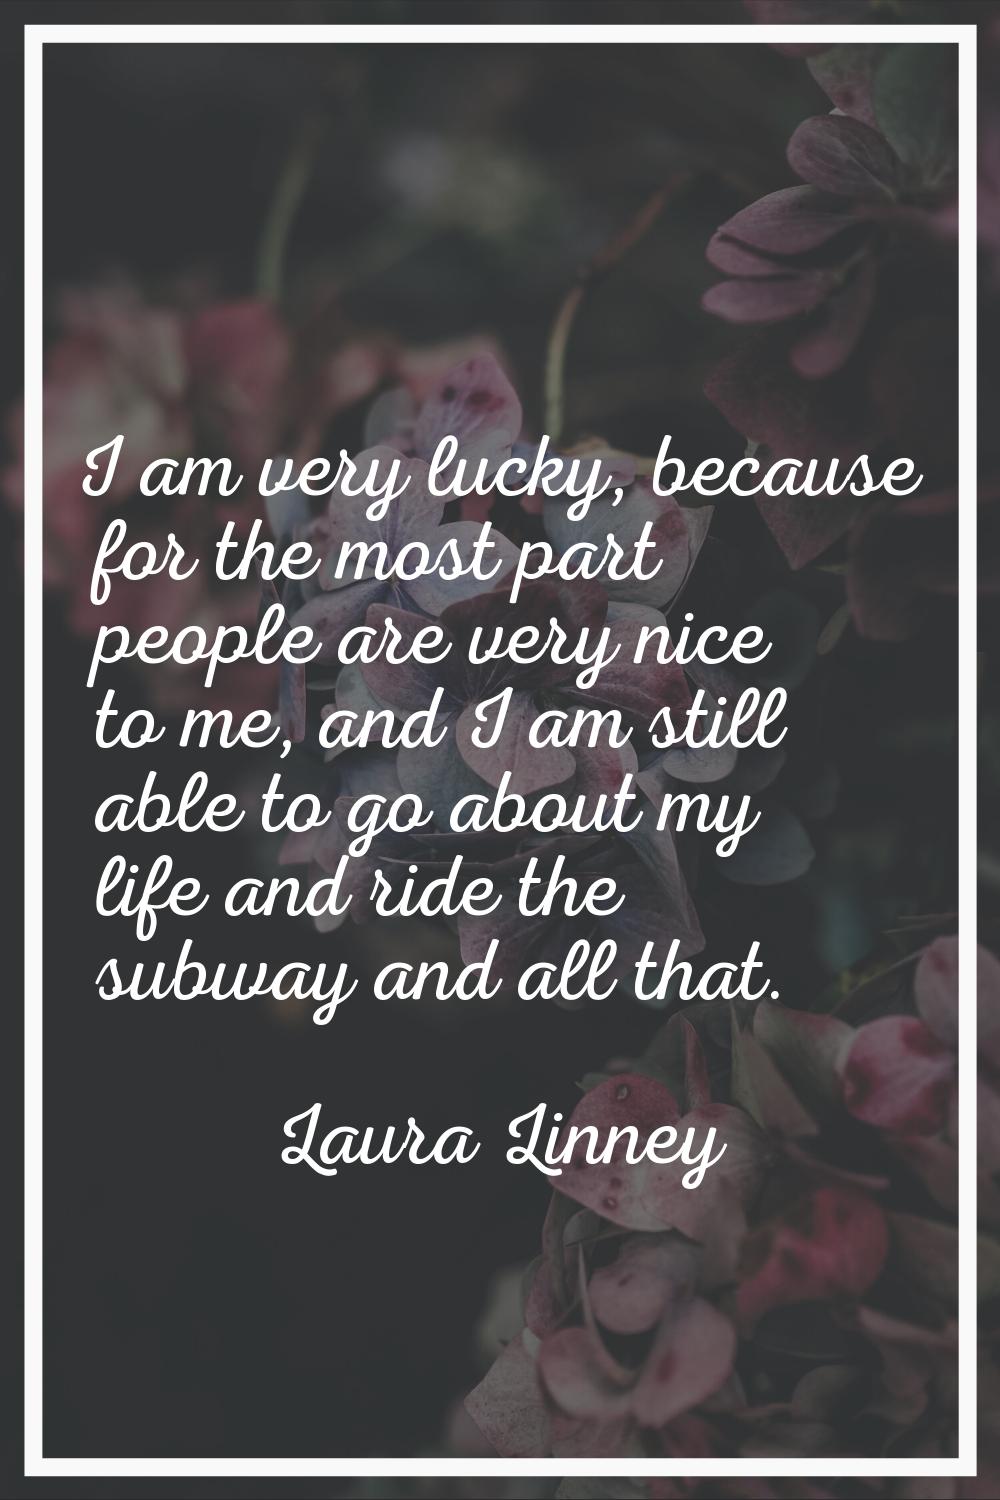 I am very lucky, because for the most part people are very nice to me, and I am still able to go ab